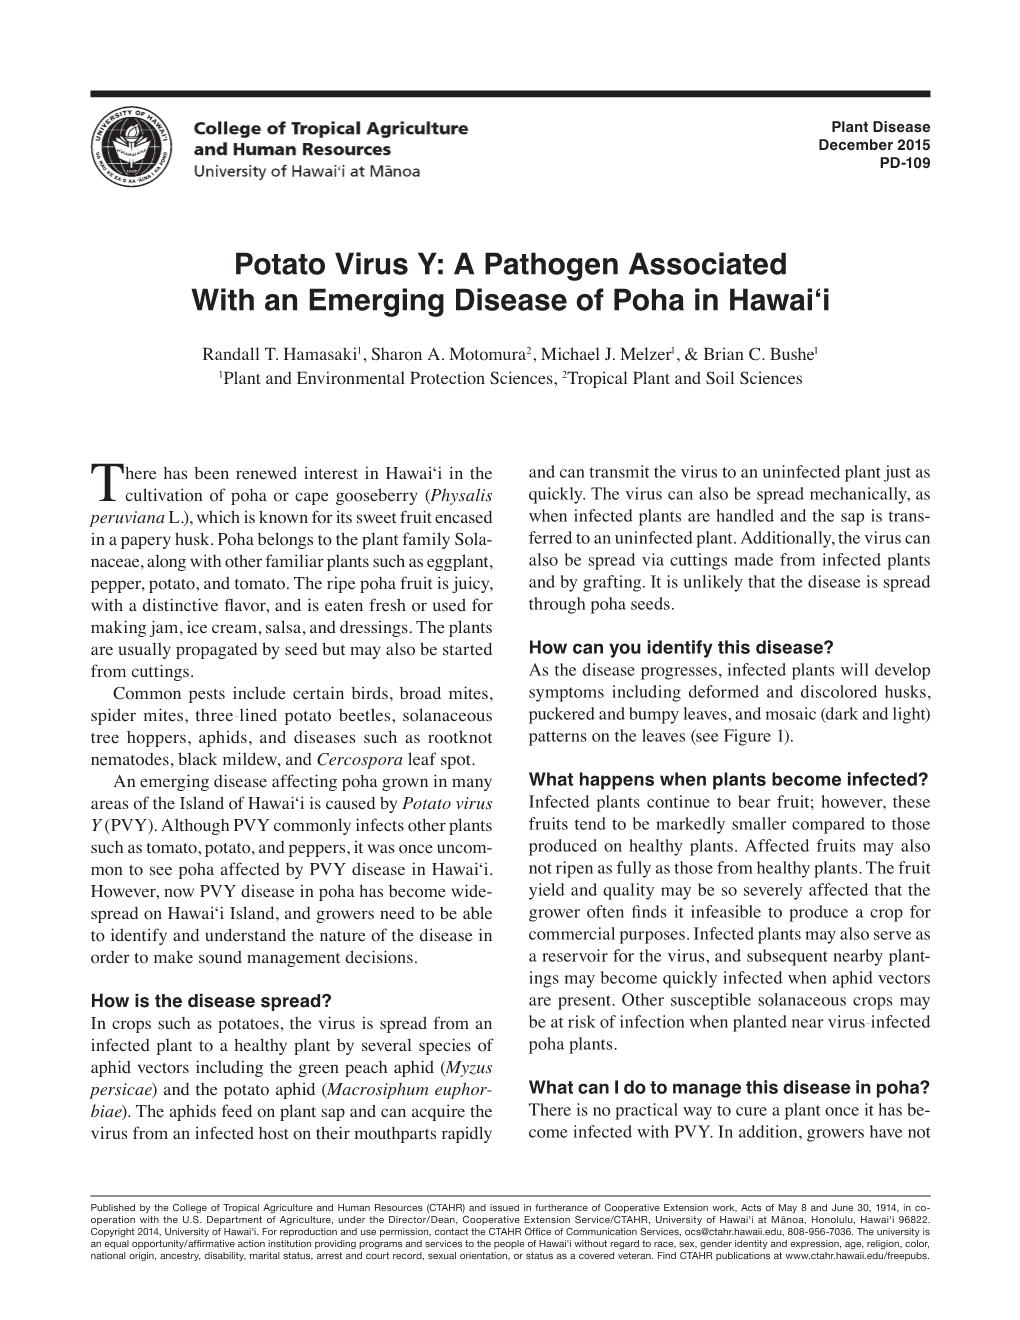 Potato Virus Y: a Pathogen Associated with an Emerging Disease of Poha in Hawai'i